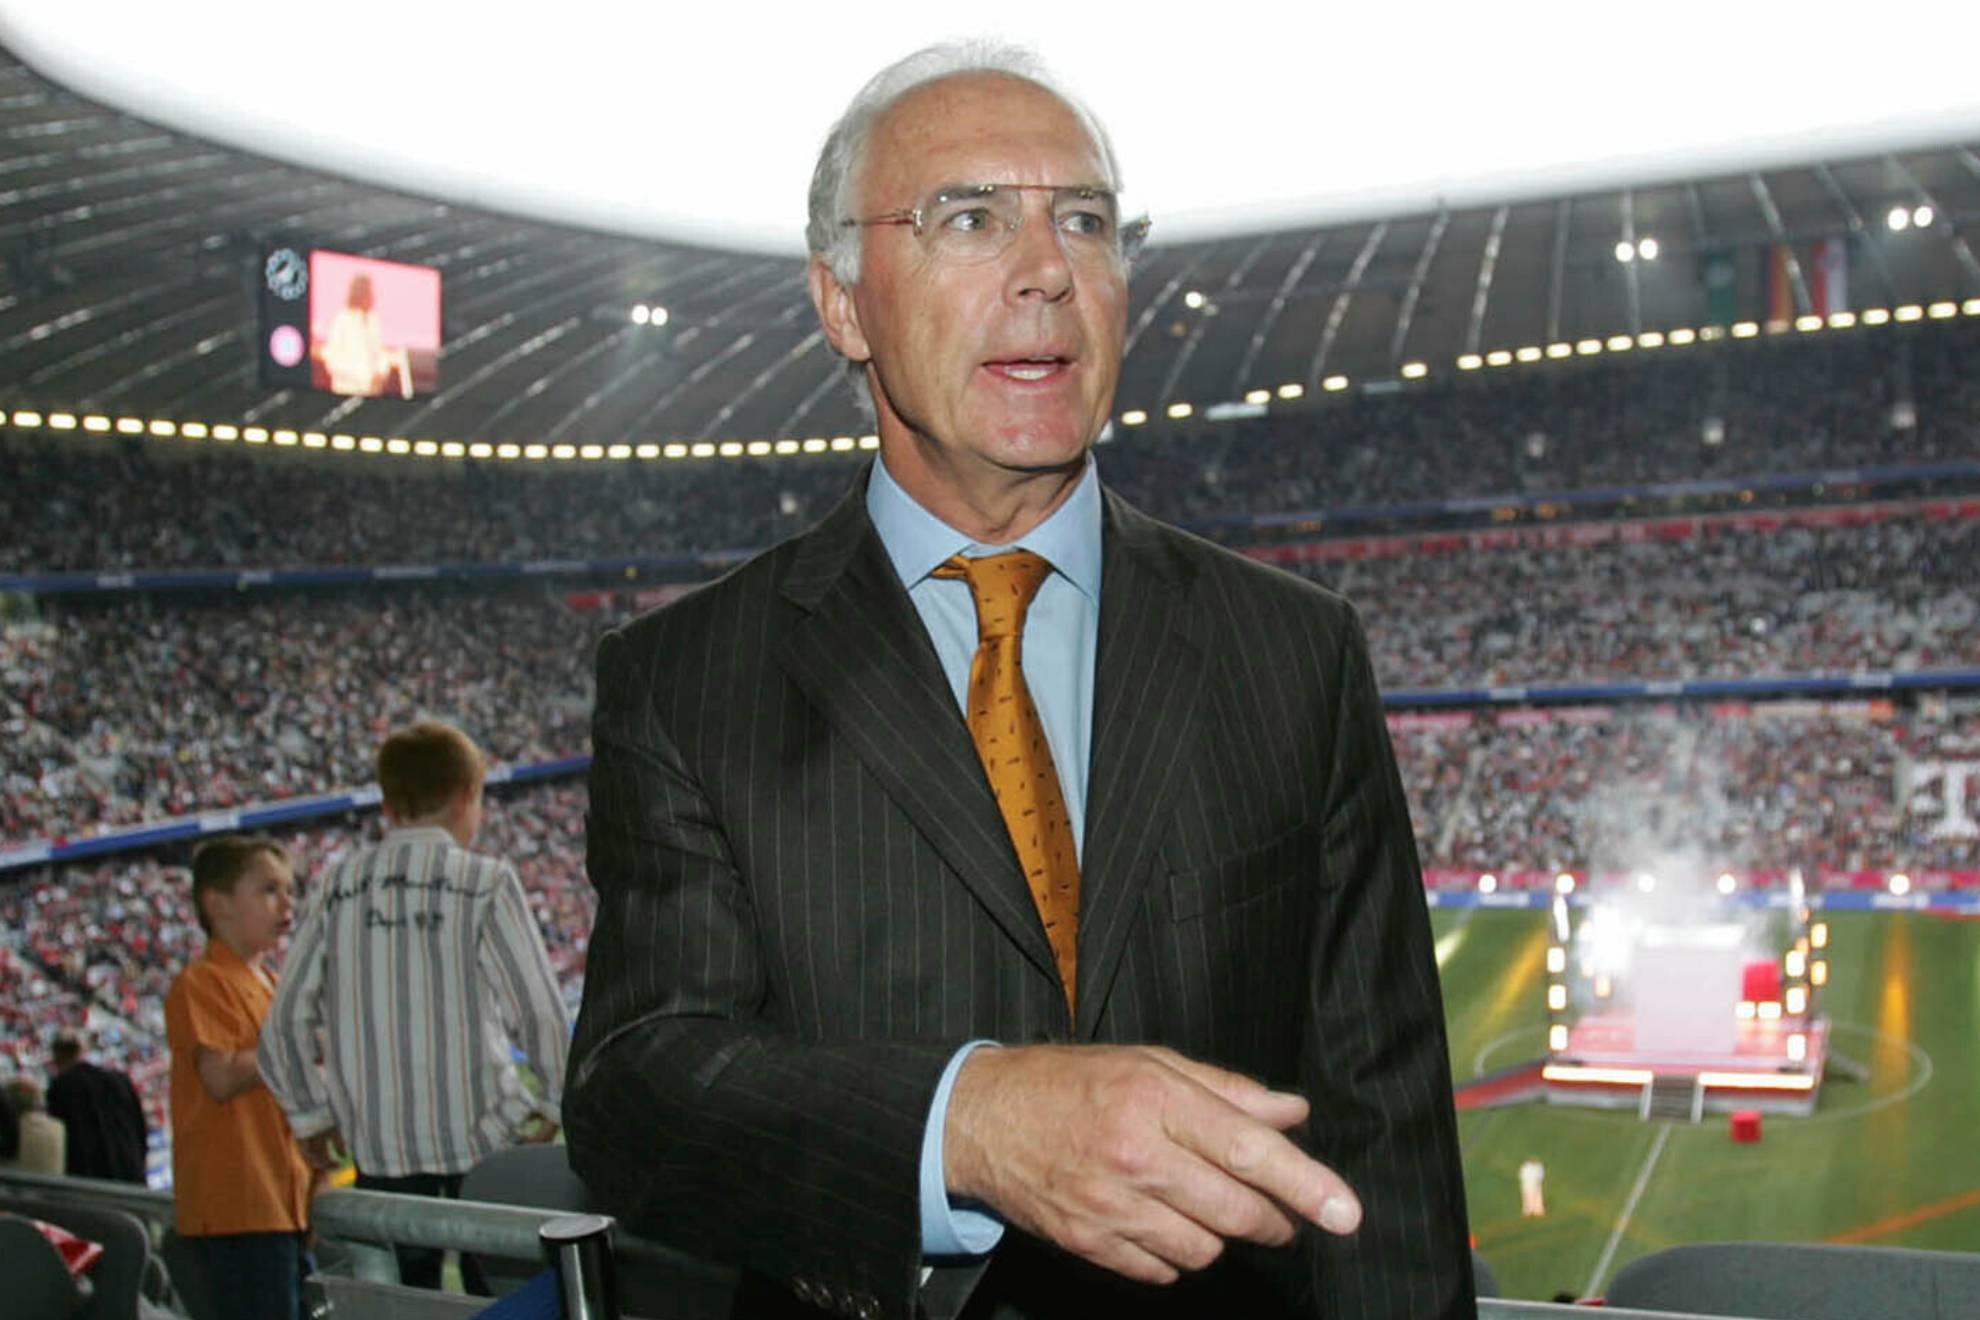 Beckenbauer ended up as a lonely old man: dramatic claim by former Bayern Munich board member